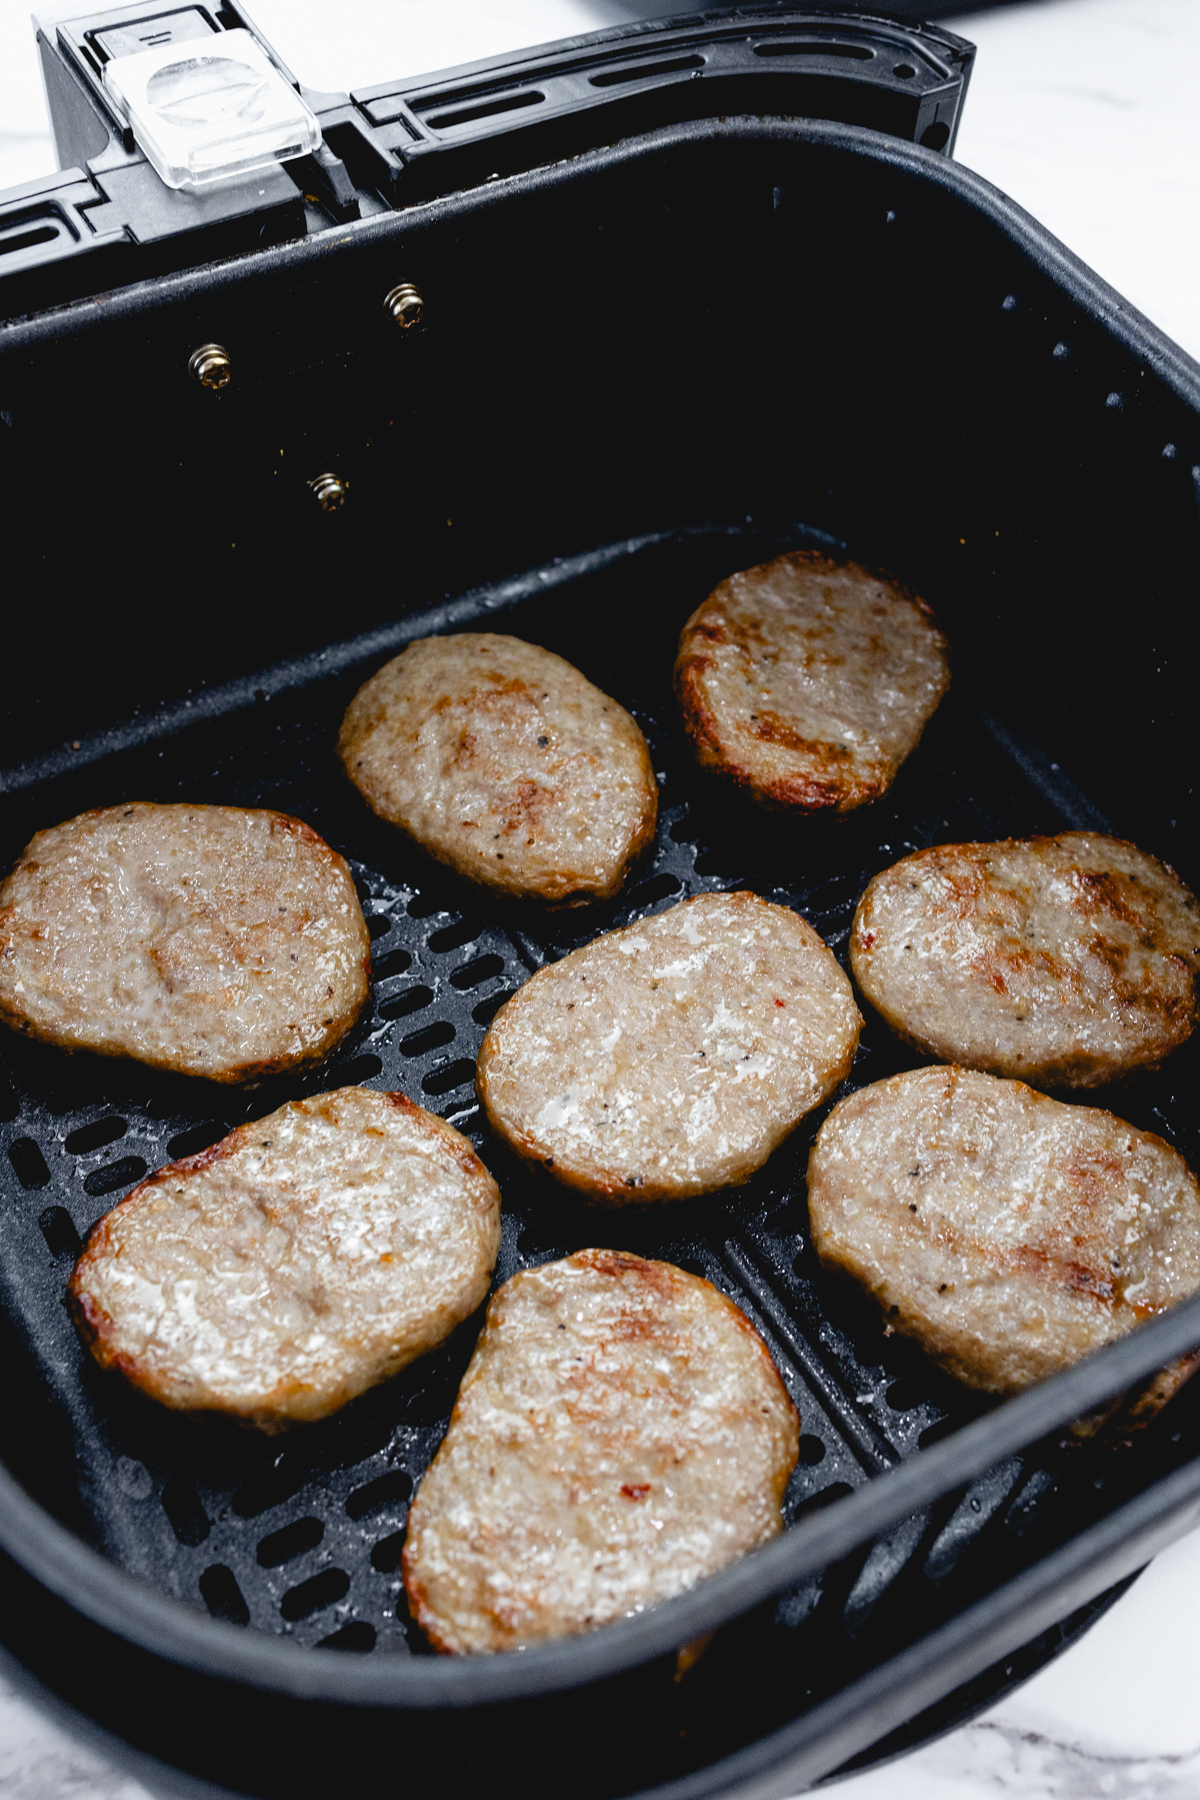 Close up of cooked sausage patties in the basket of an open air fryer.